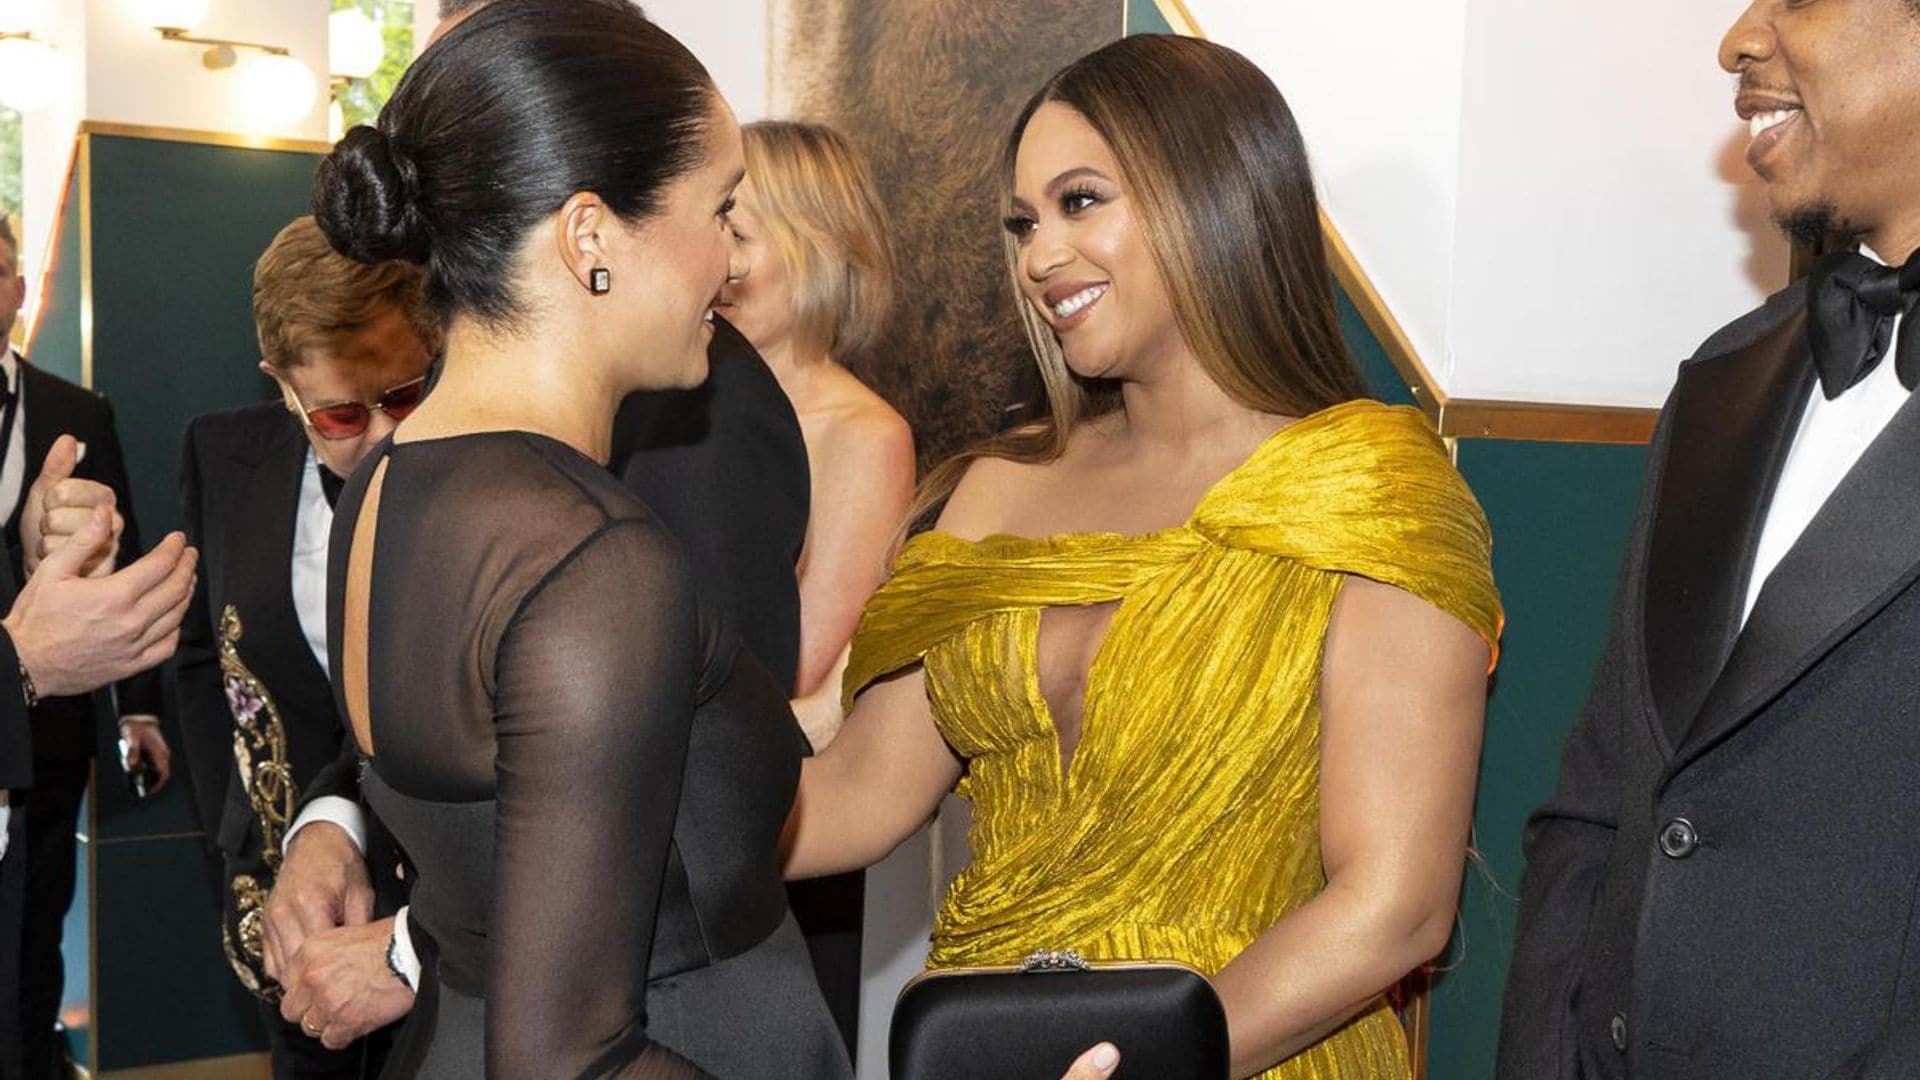 Beyoncé and Meghan Markle’s moms pose together in new photo